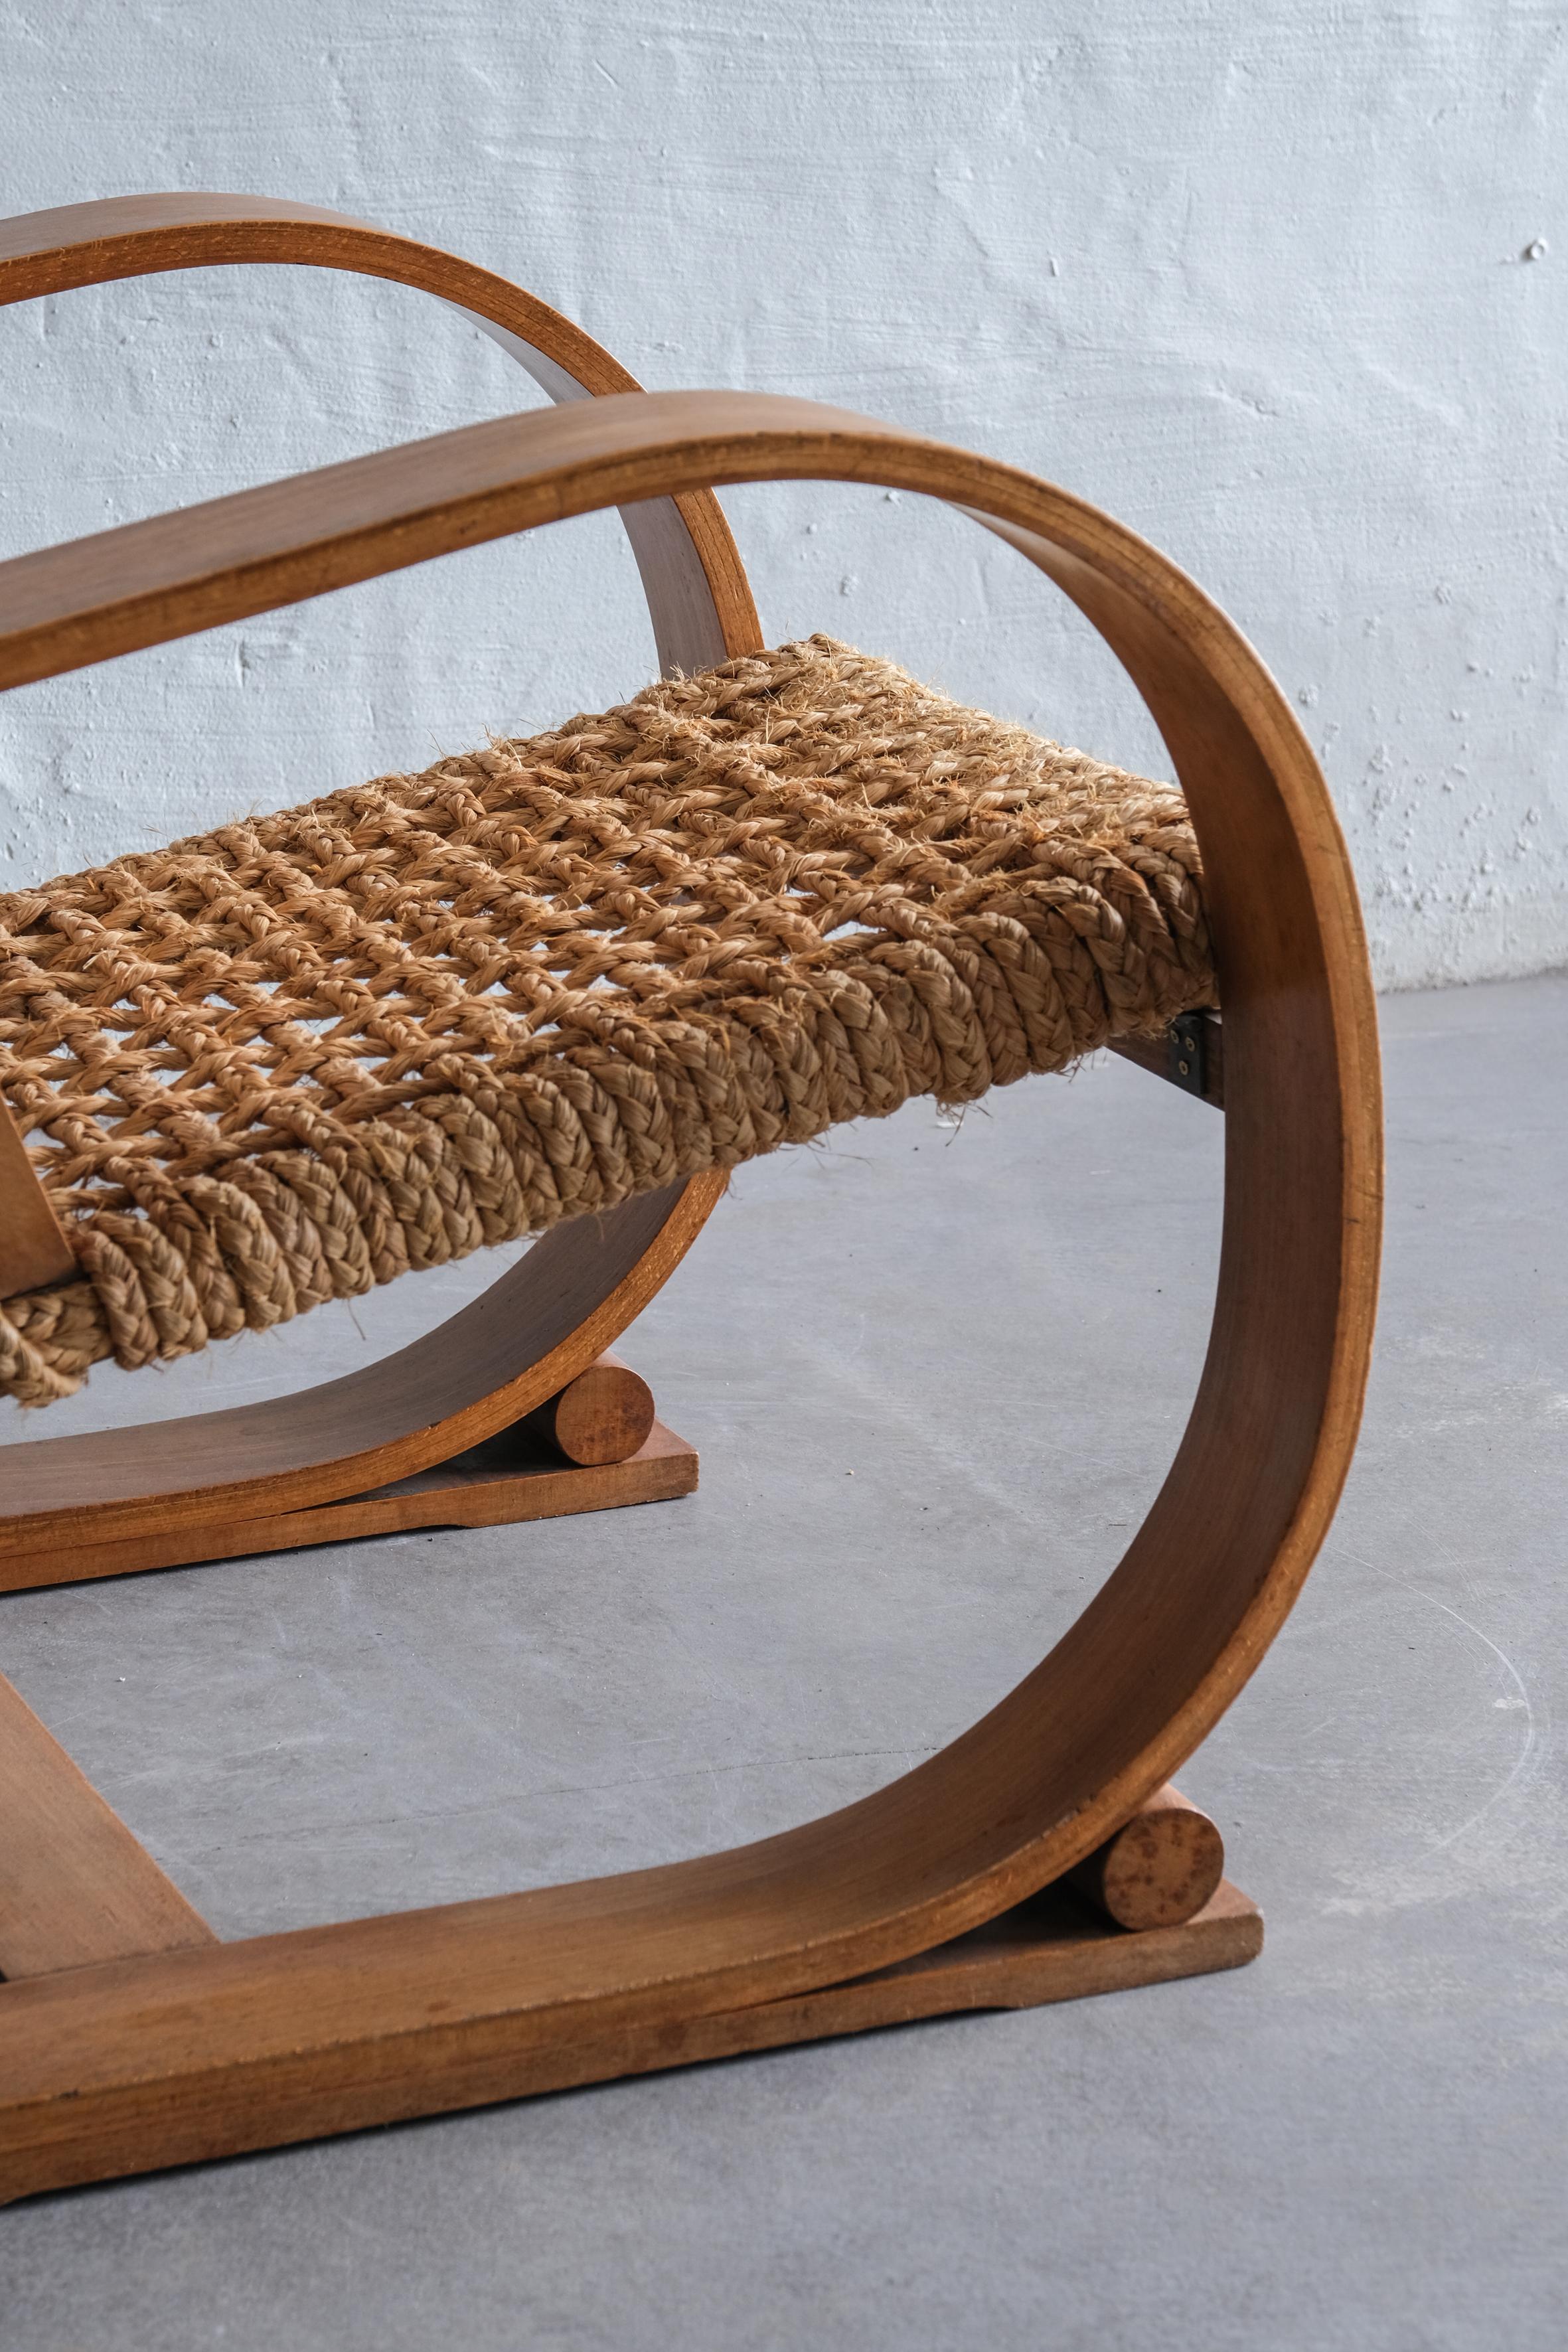 French Lounge chair also known as Rope chair by Audoux Minet 1950